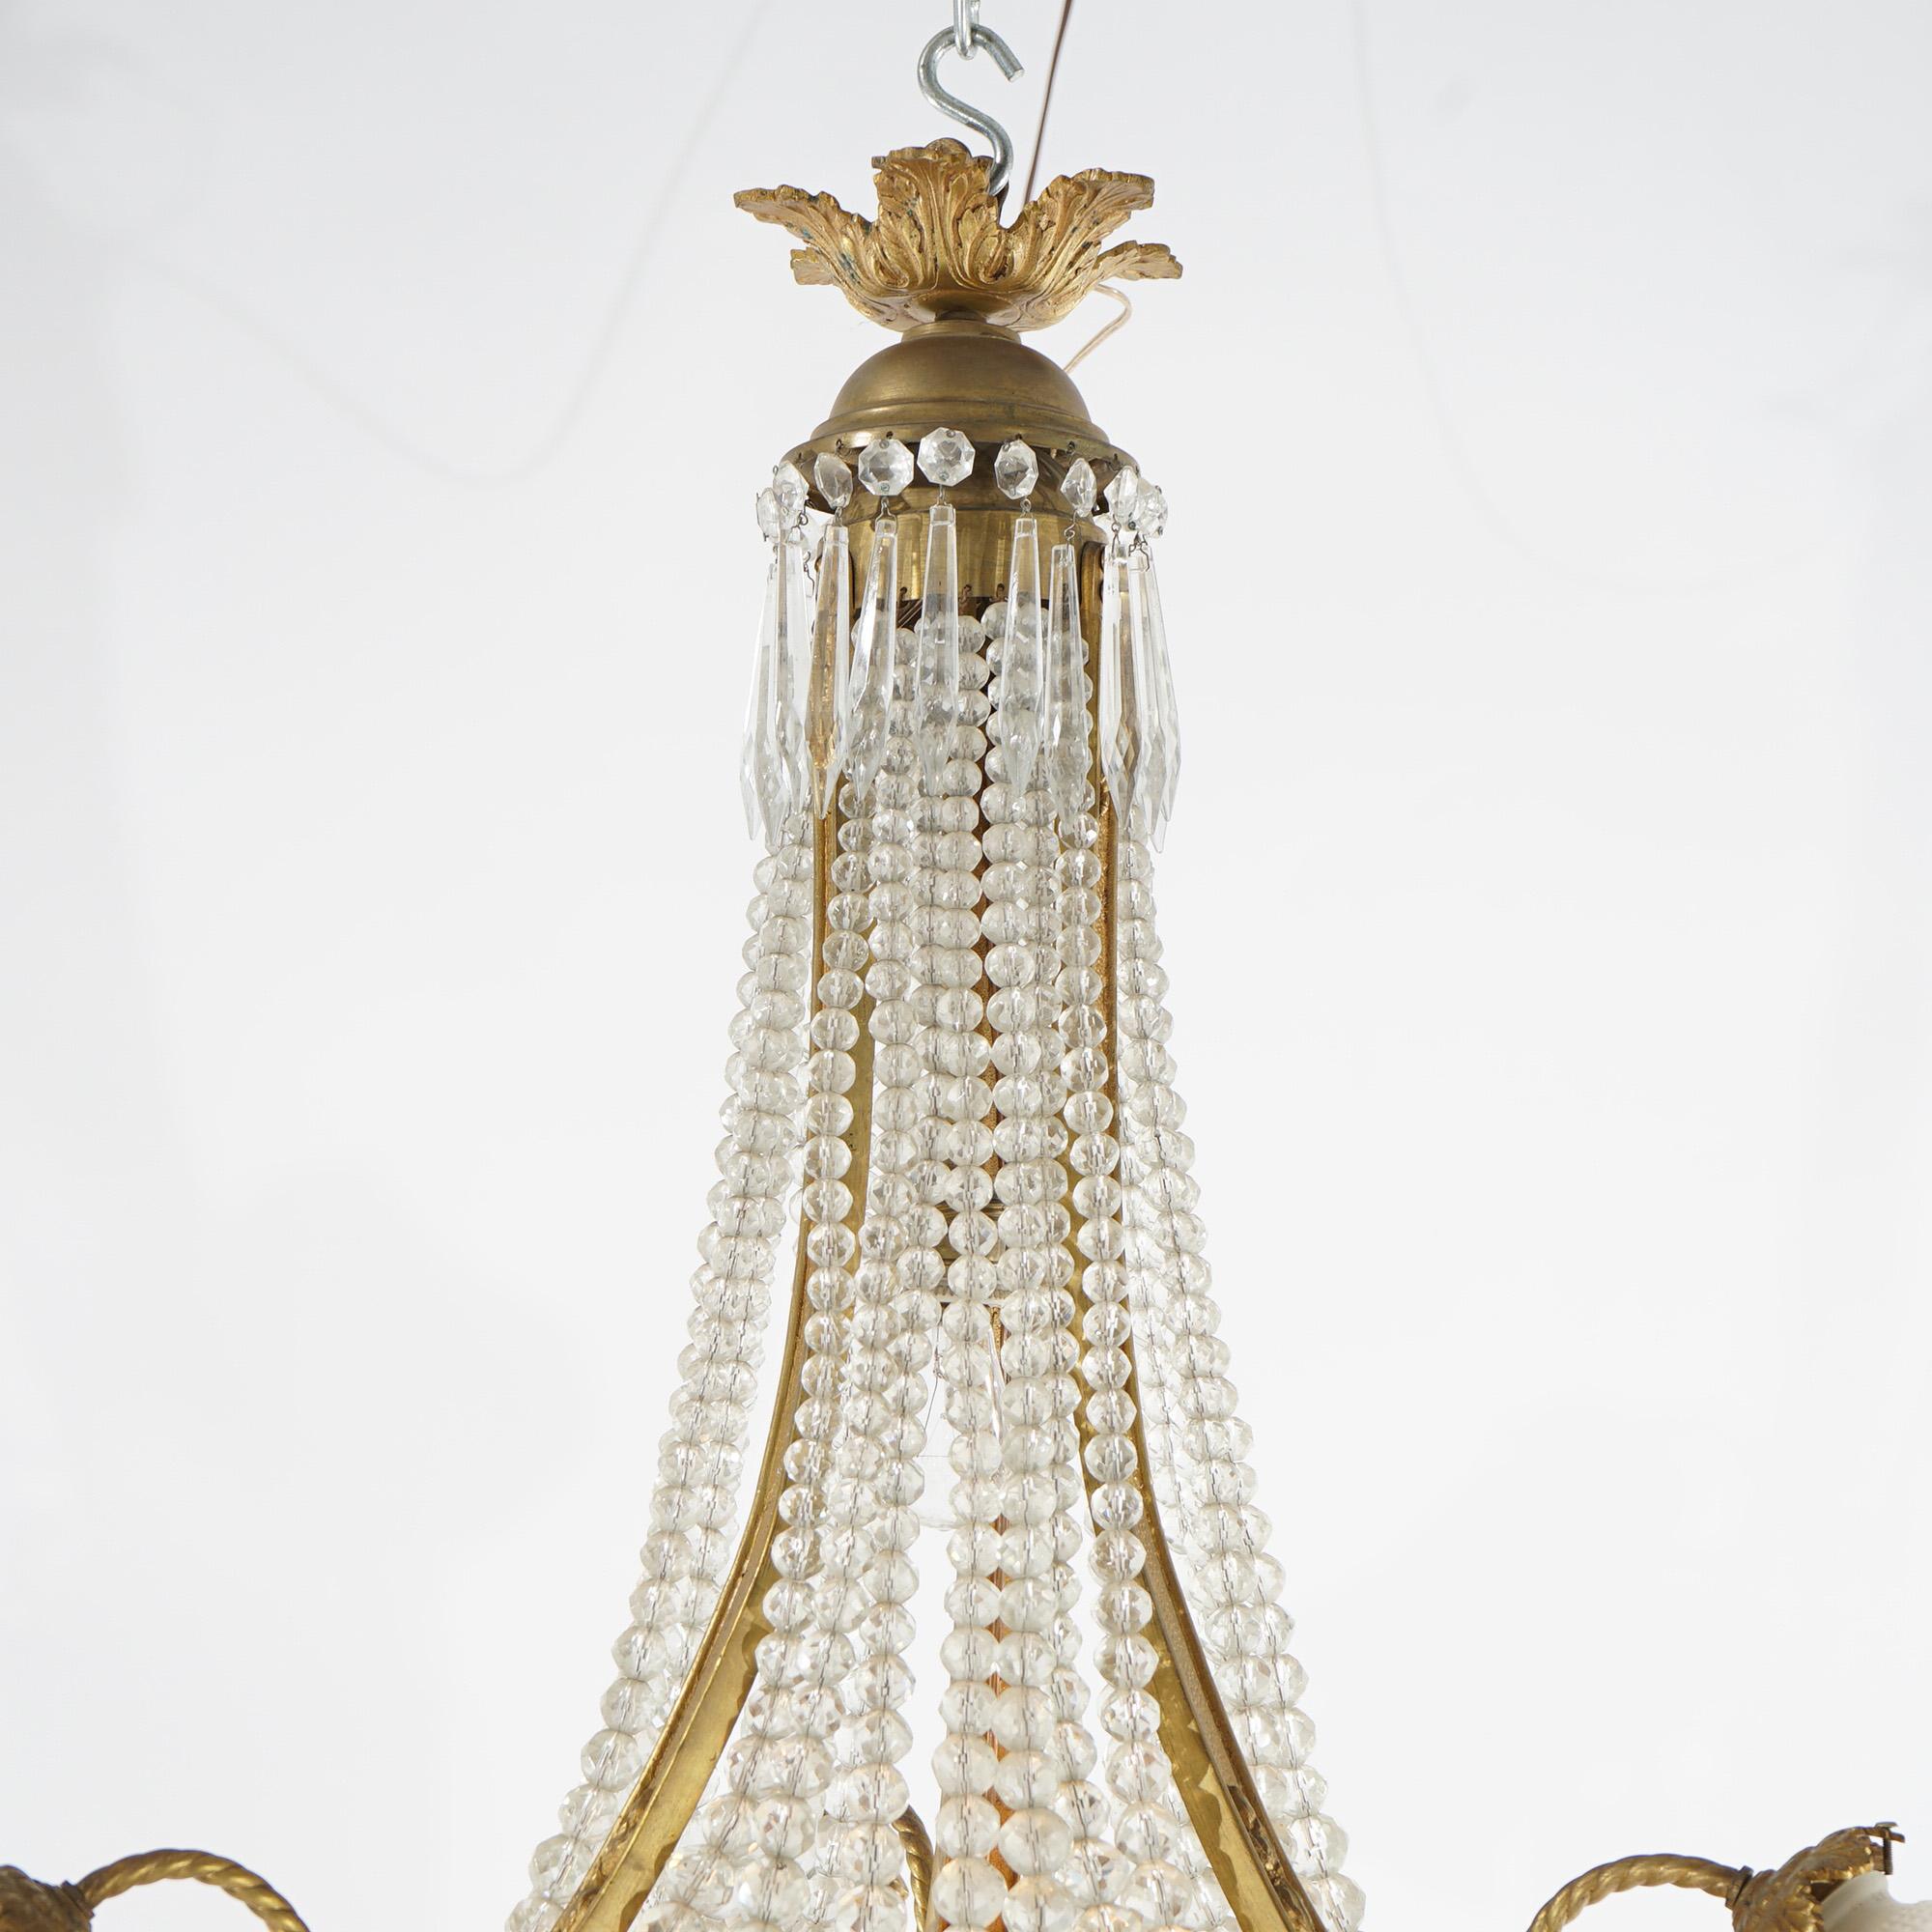 Antique French Louis XIV Gilt Bronze, Crystal & Beaded 6 Light Chandelier c1920 For Sale 5